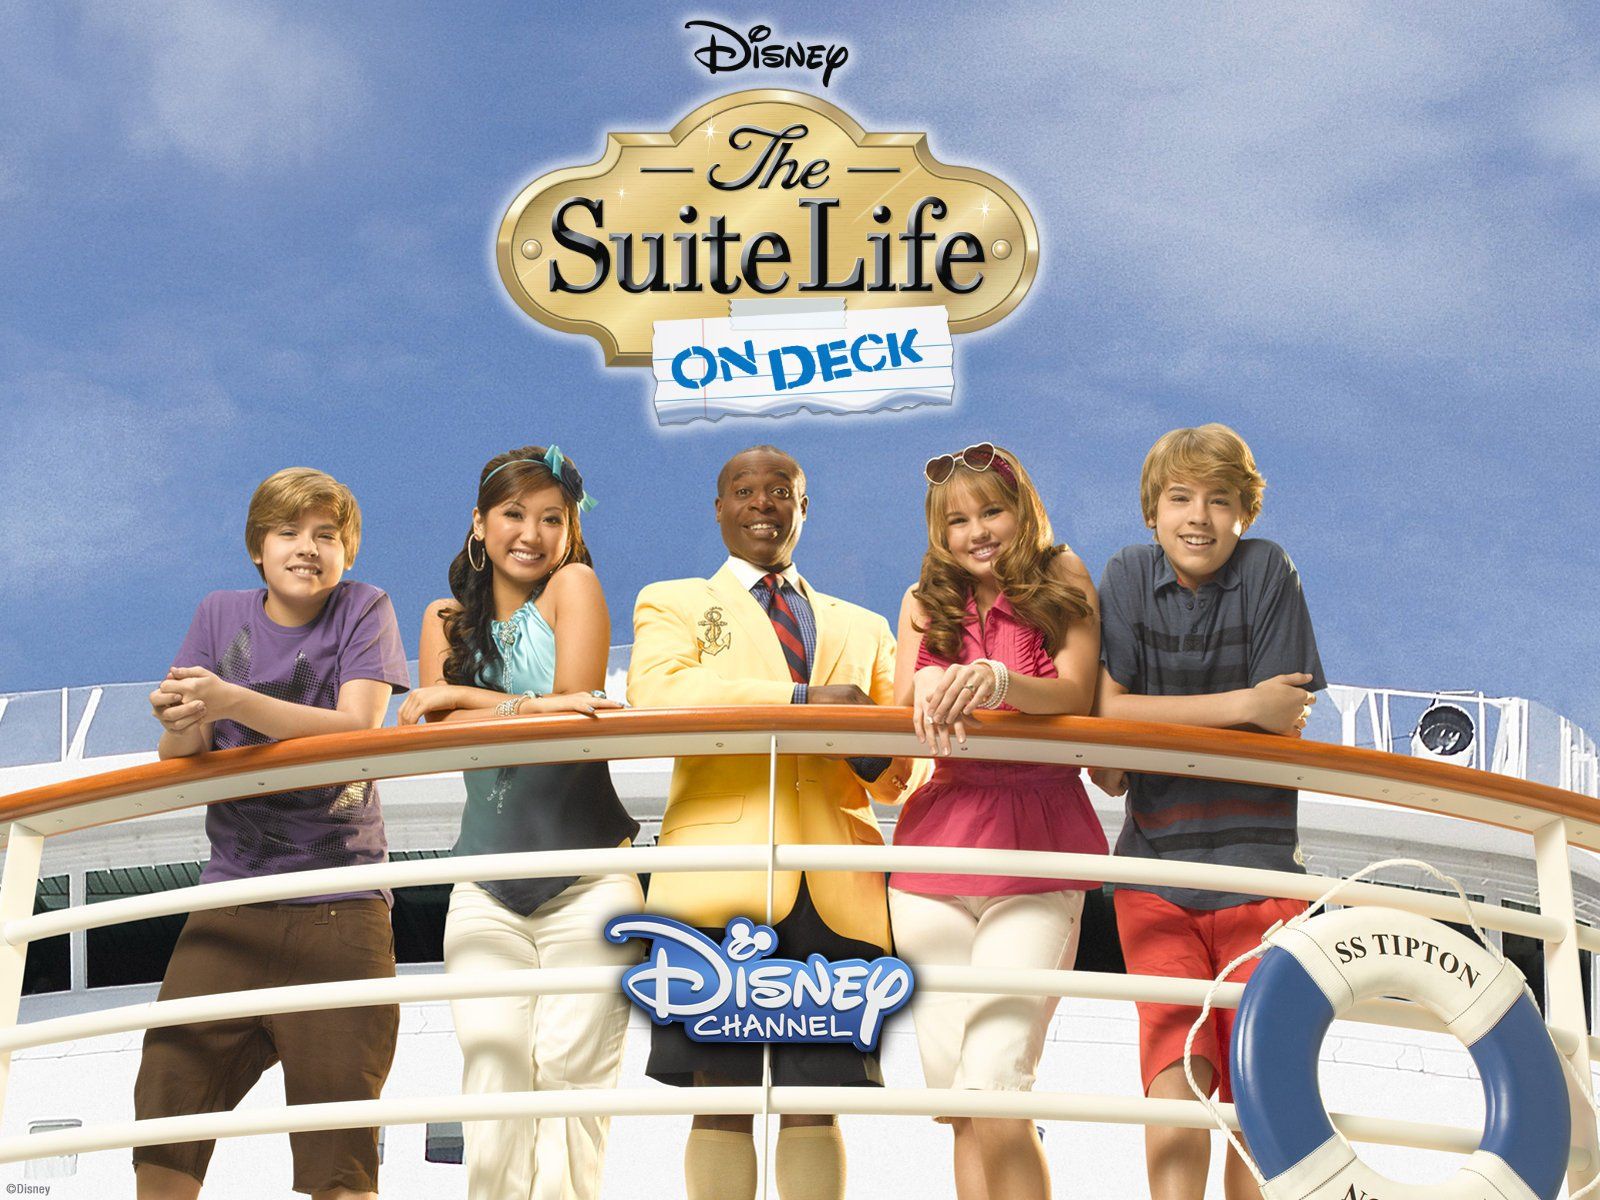 Watch The Suite Life On Deck Volume 3.